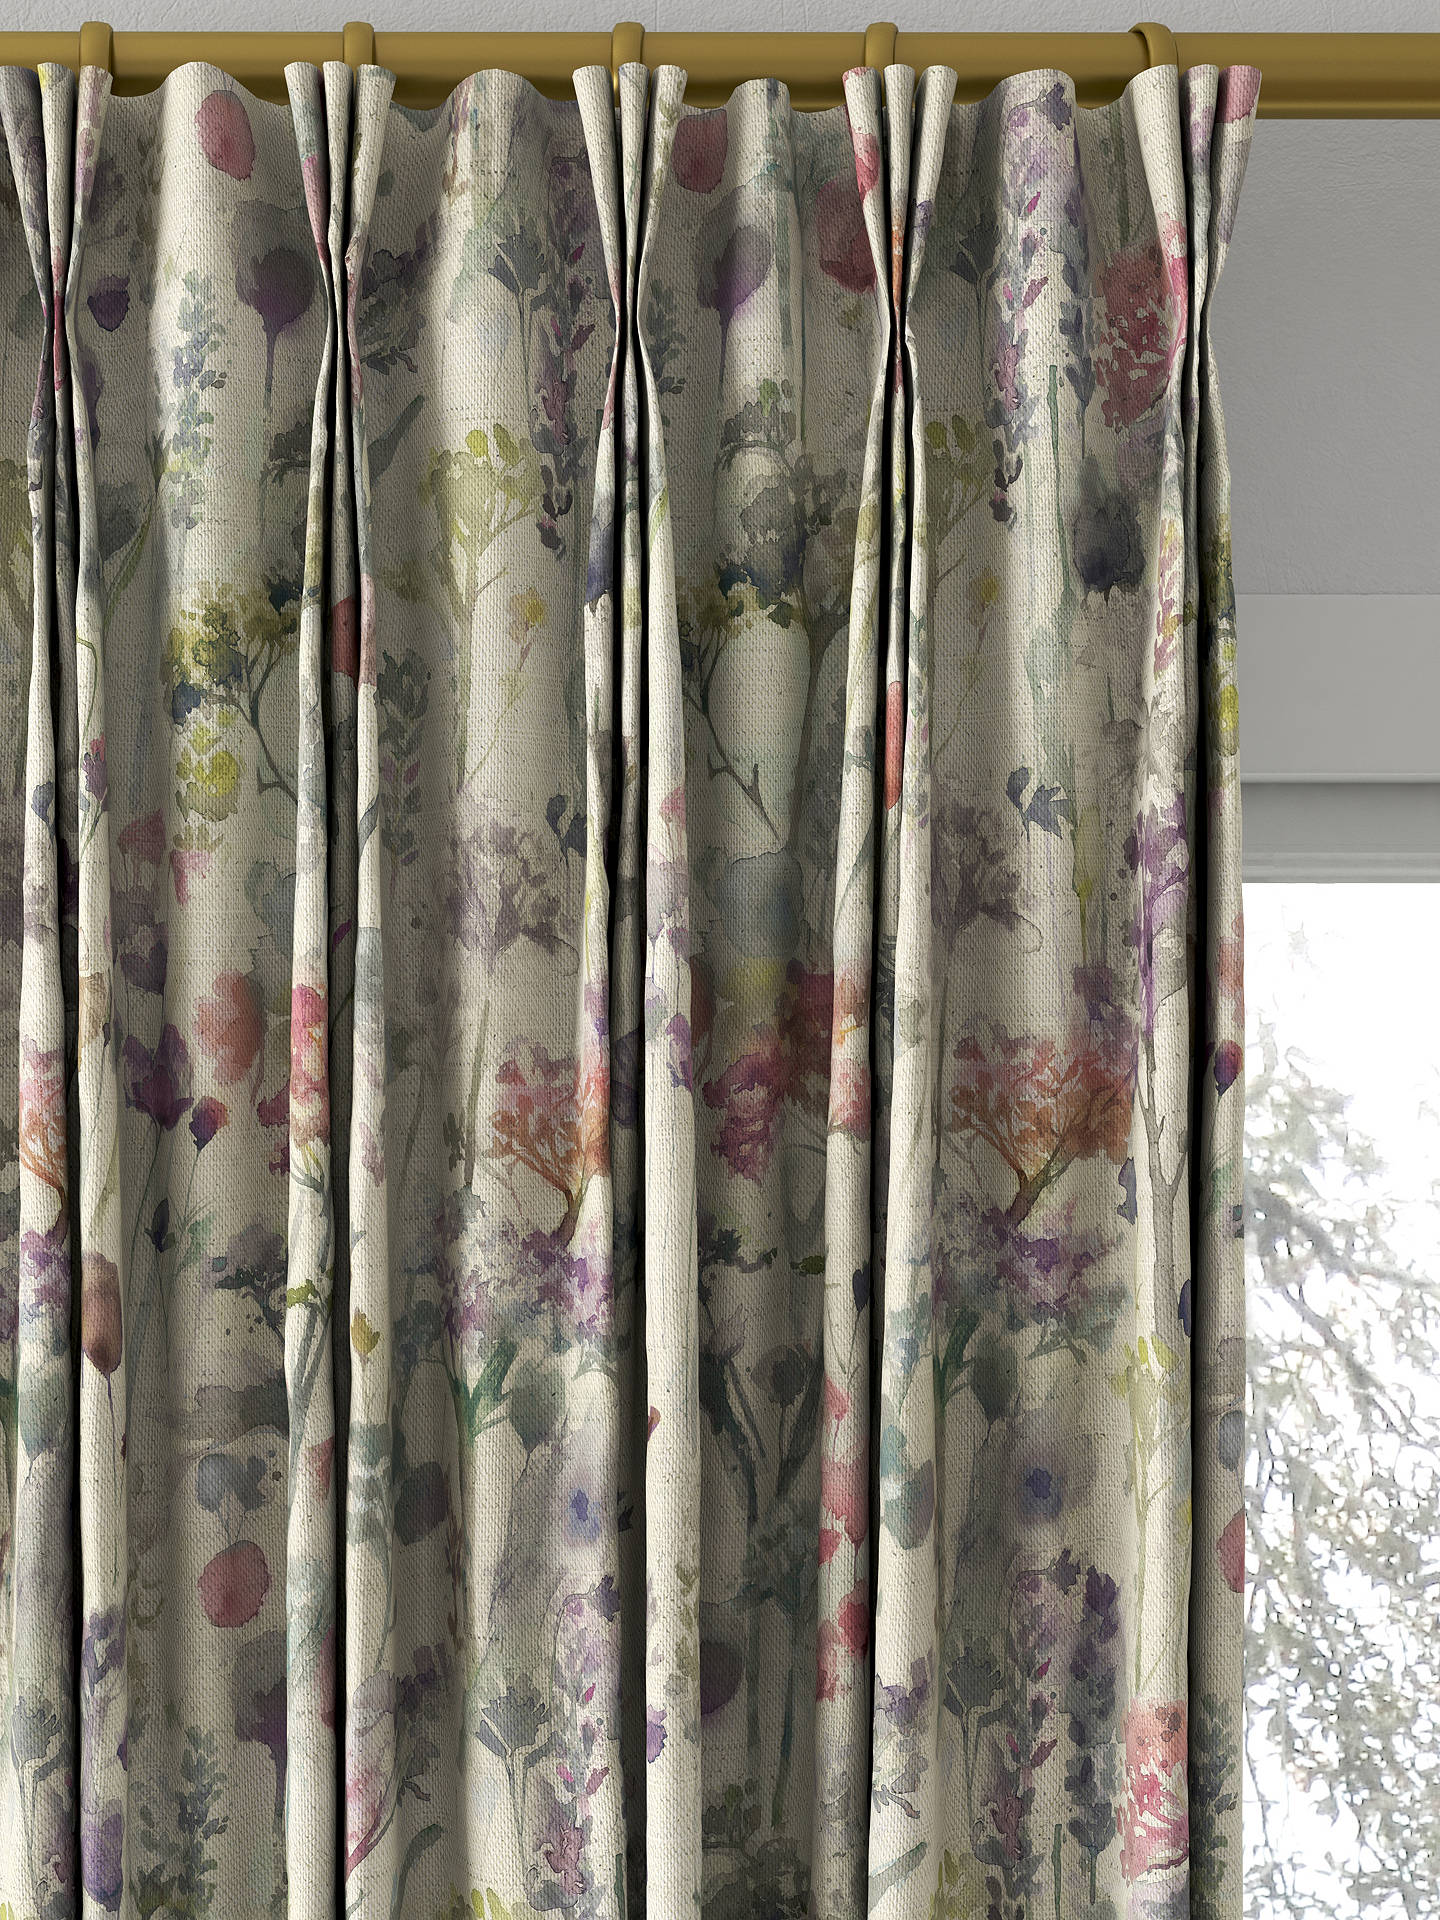 Voyage Ilinzas Made to Measure Curtains, Coral Natural